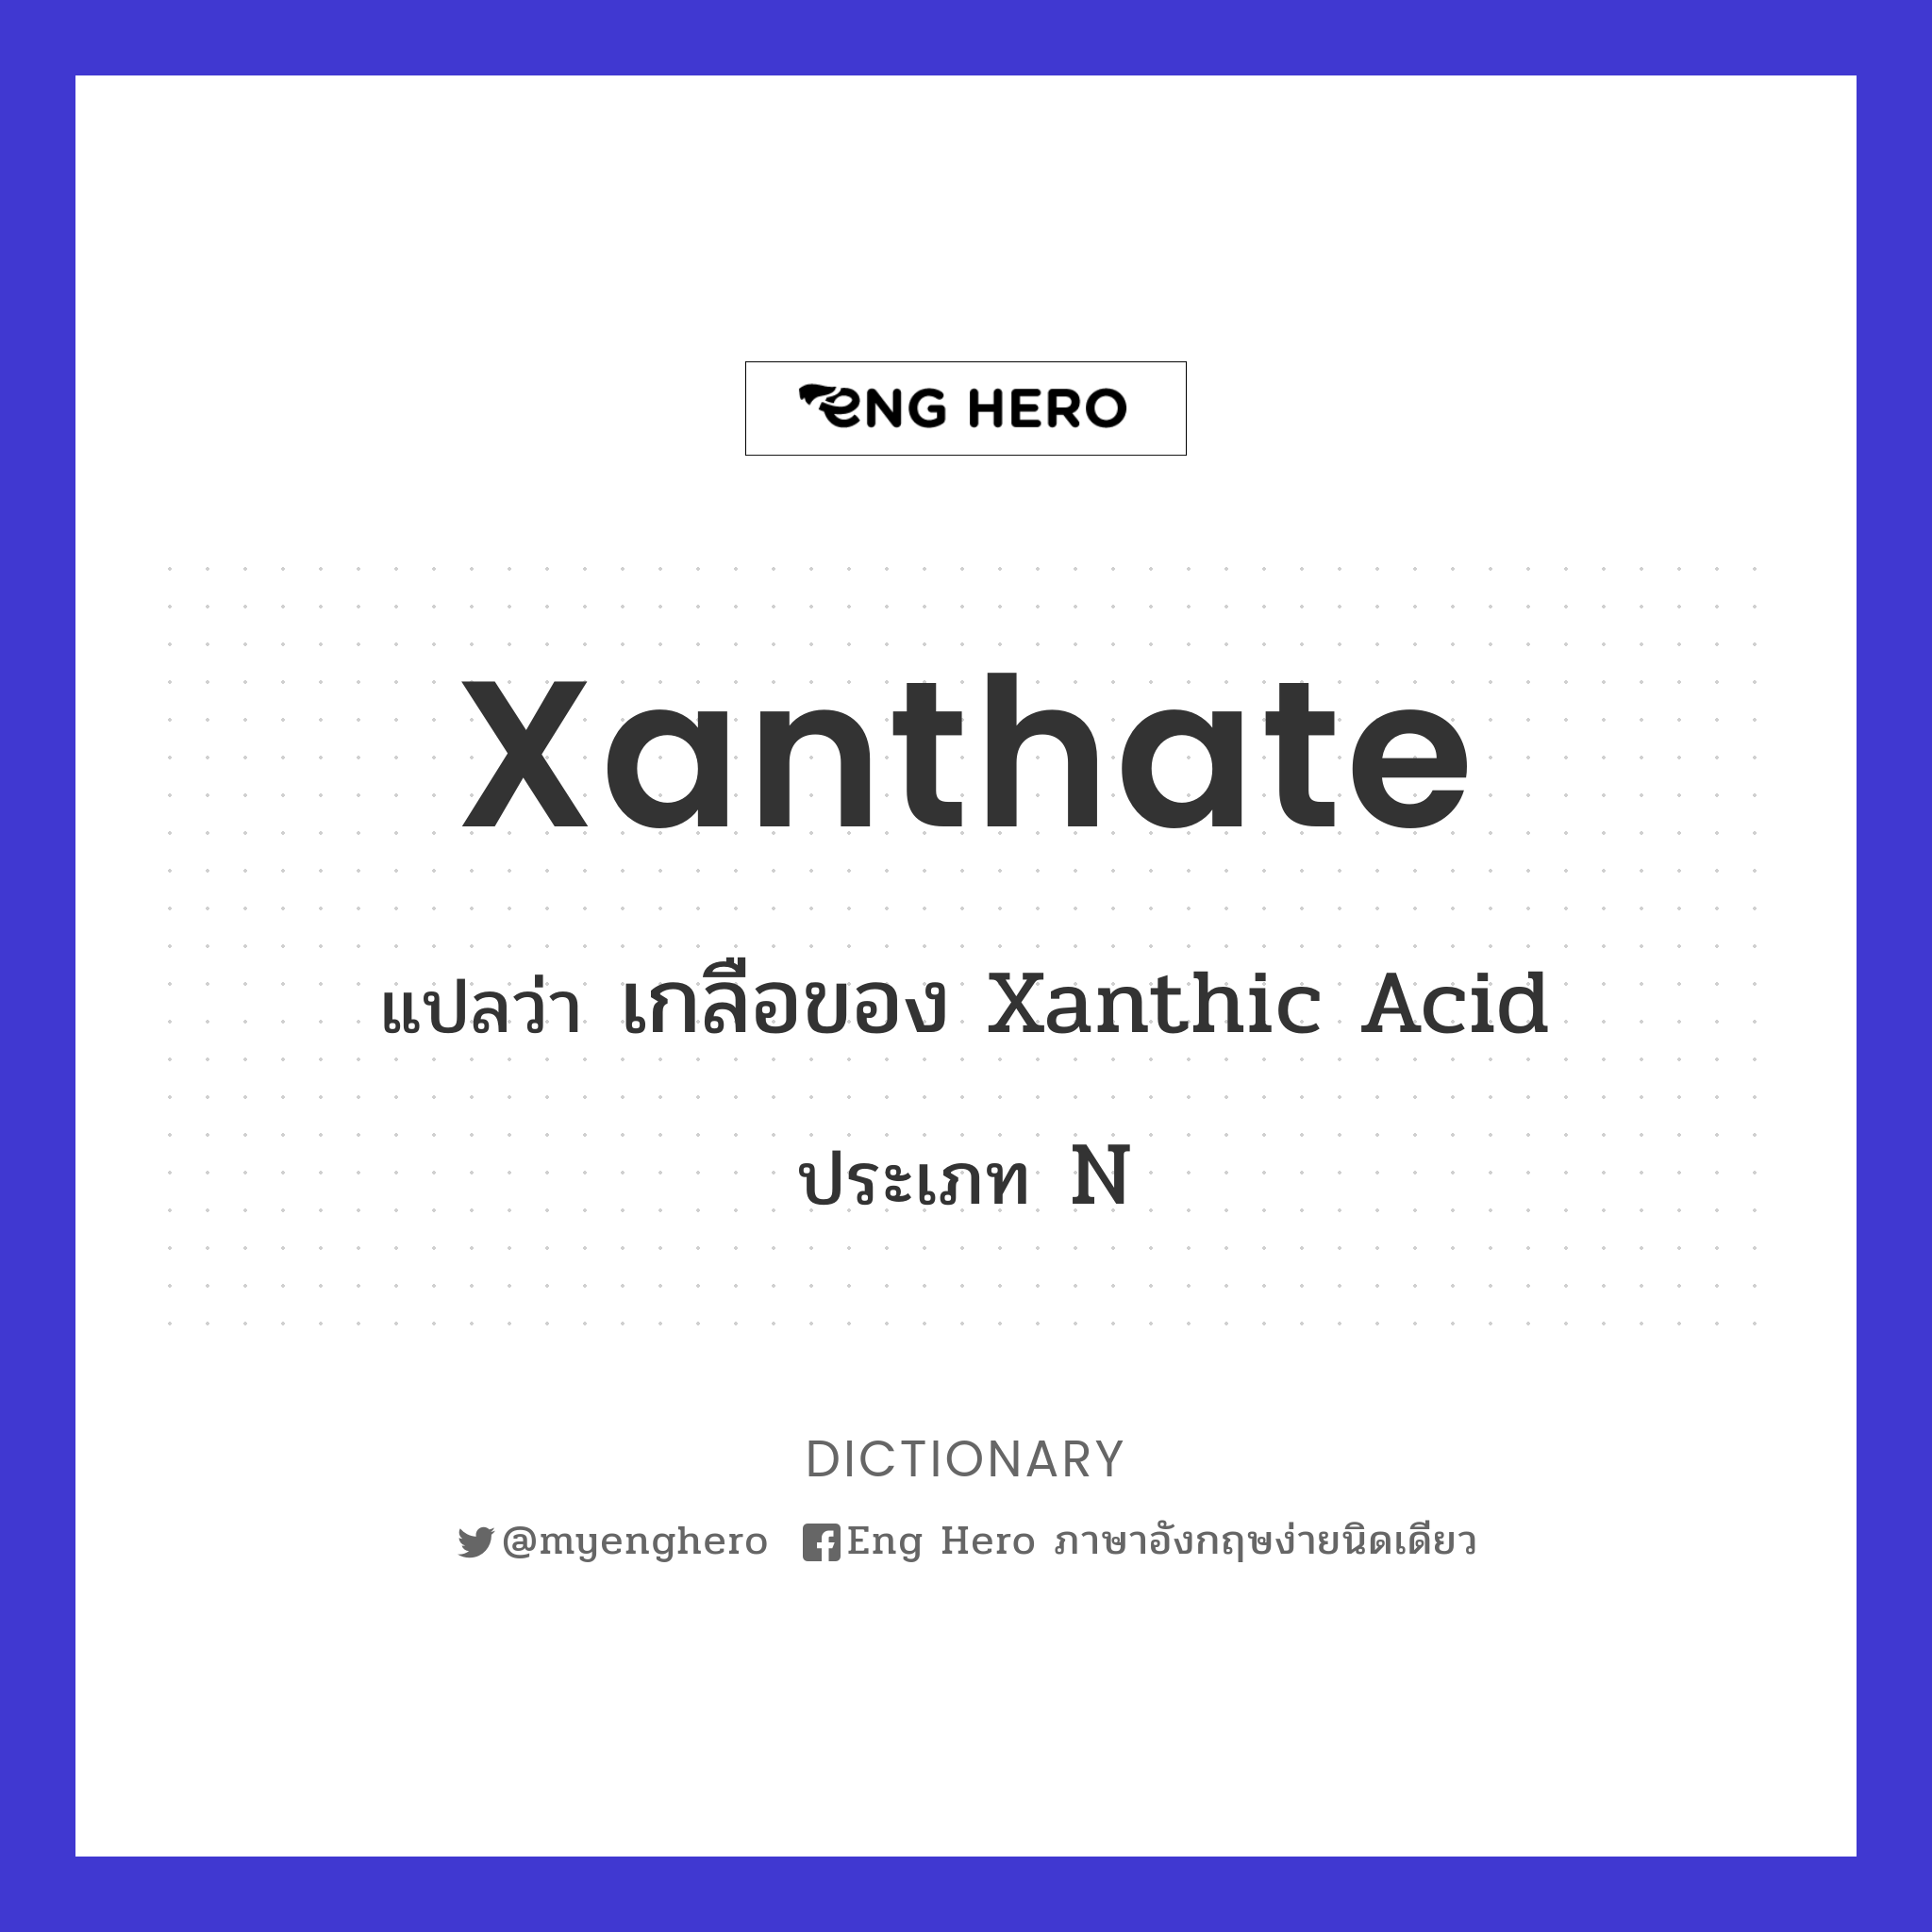 xanthate